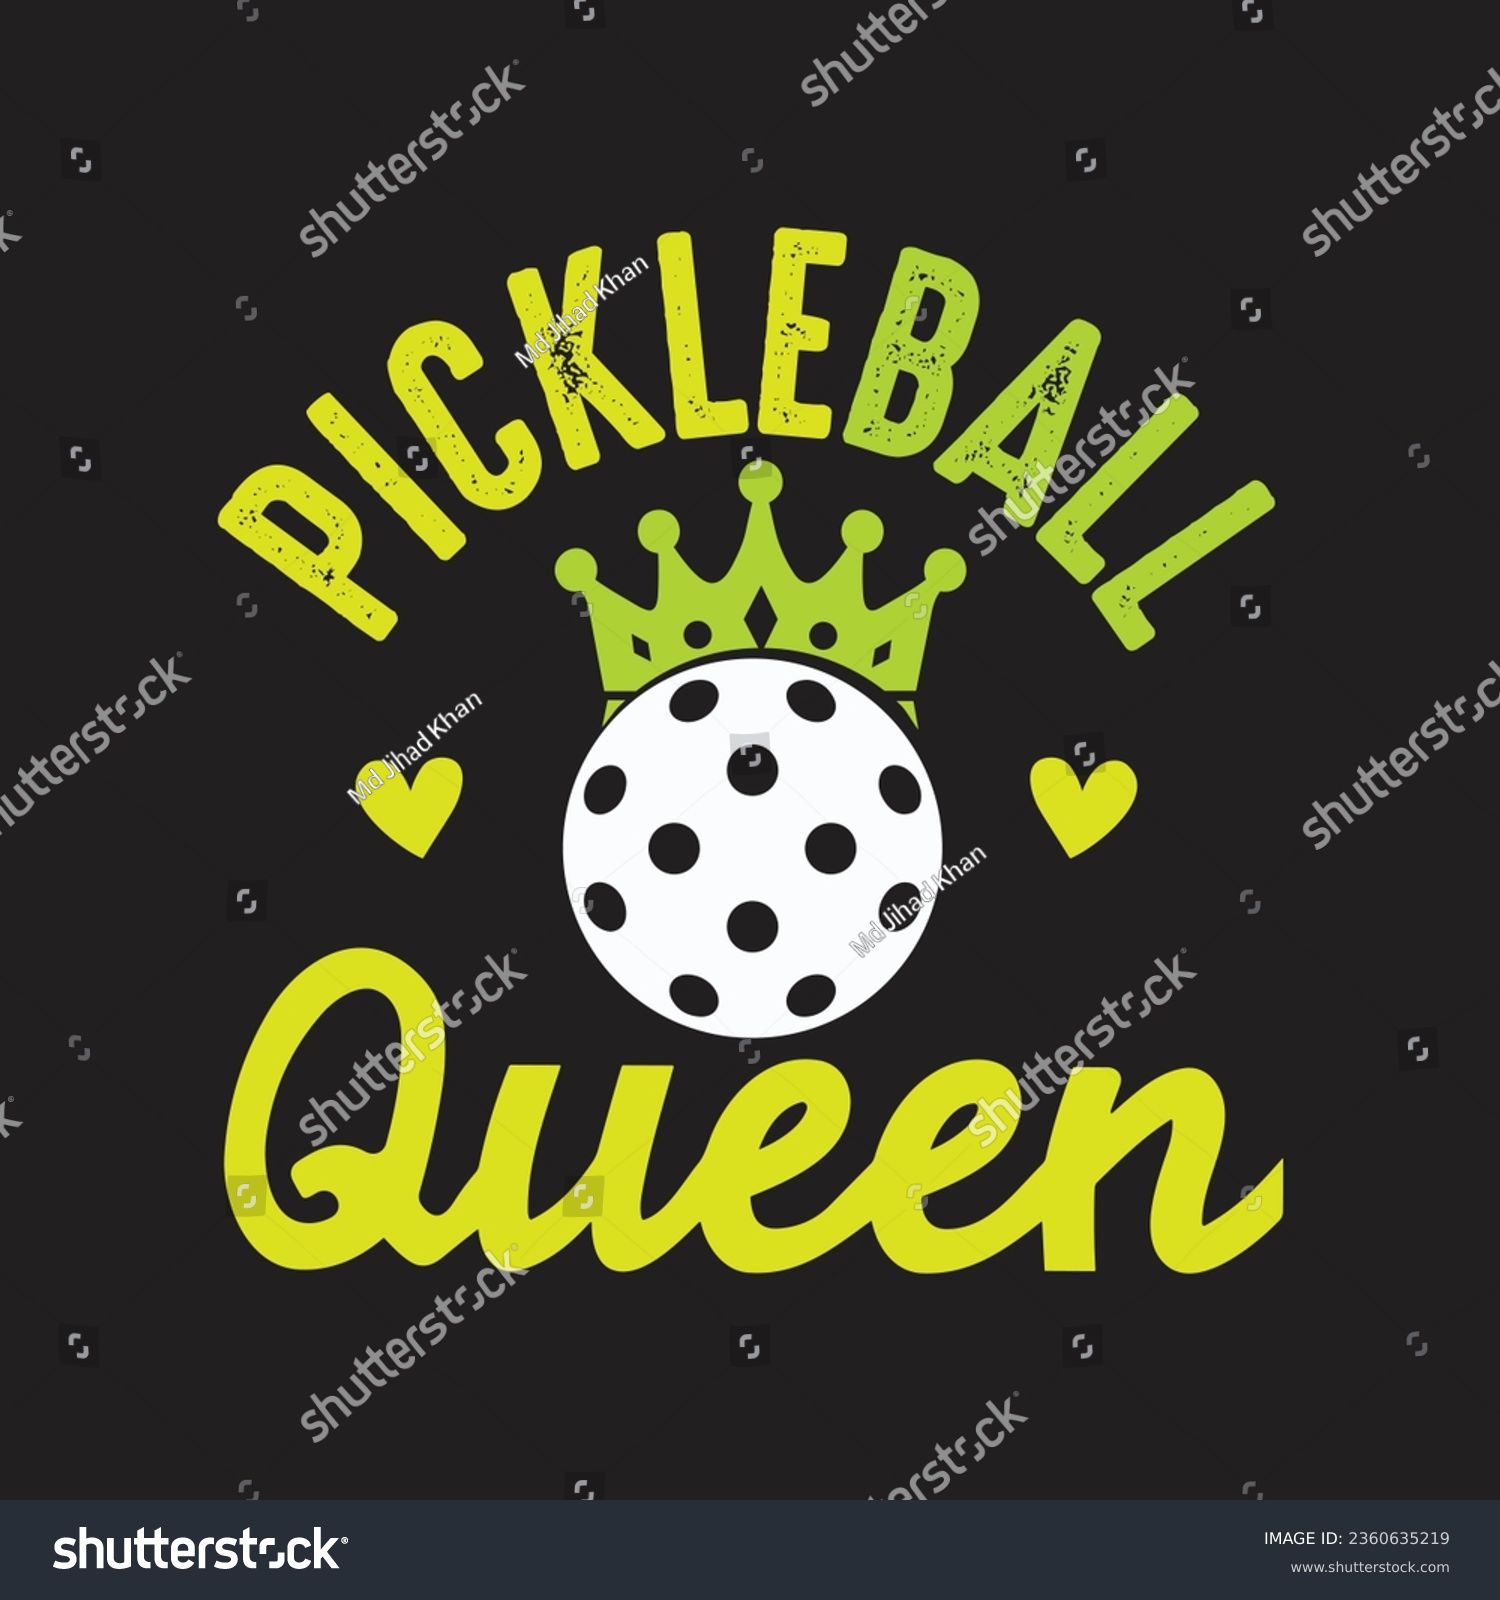 SVG of Pickball Queen- Pickball T-Shirt Design, Posters, Greeting Cards, Textiles, and Sticker Vector Illustration	
 svg